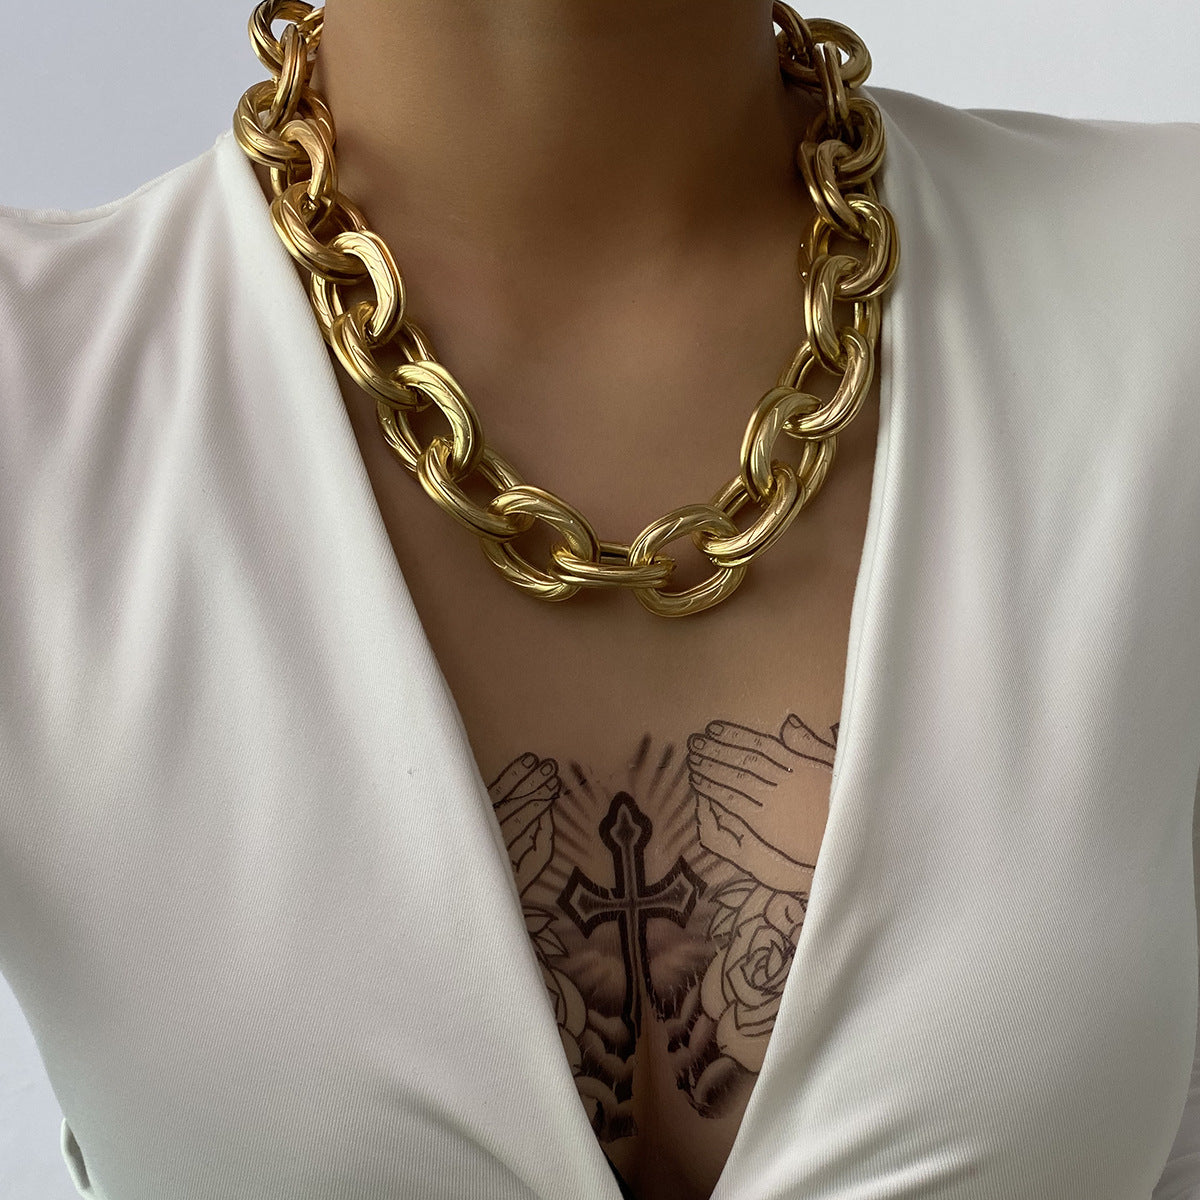 Stylish Chunky Gold Chain Necklace.